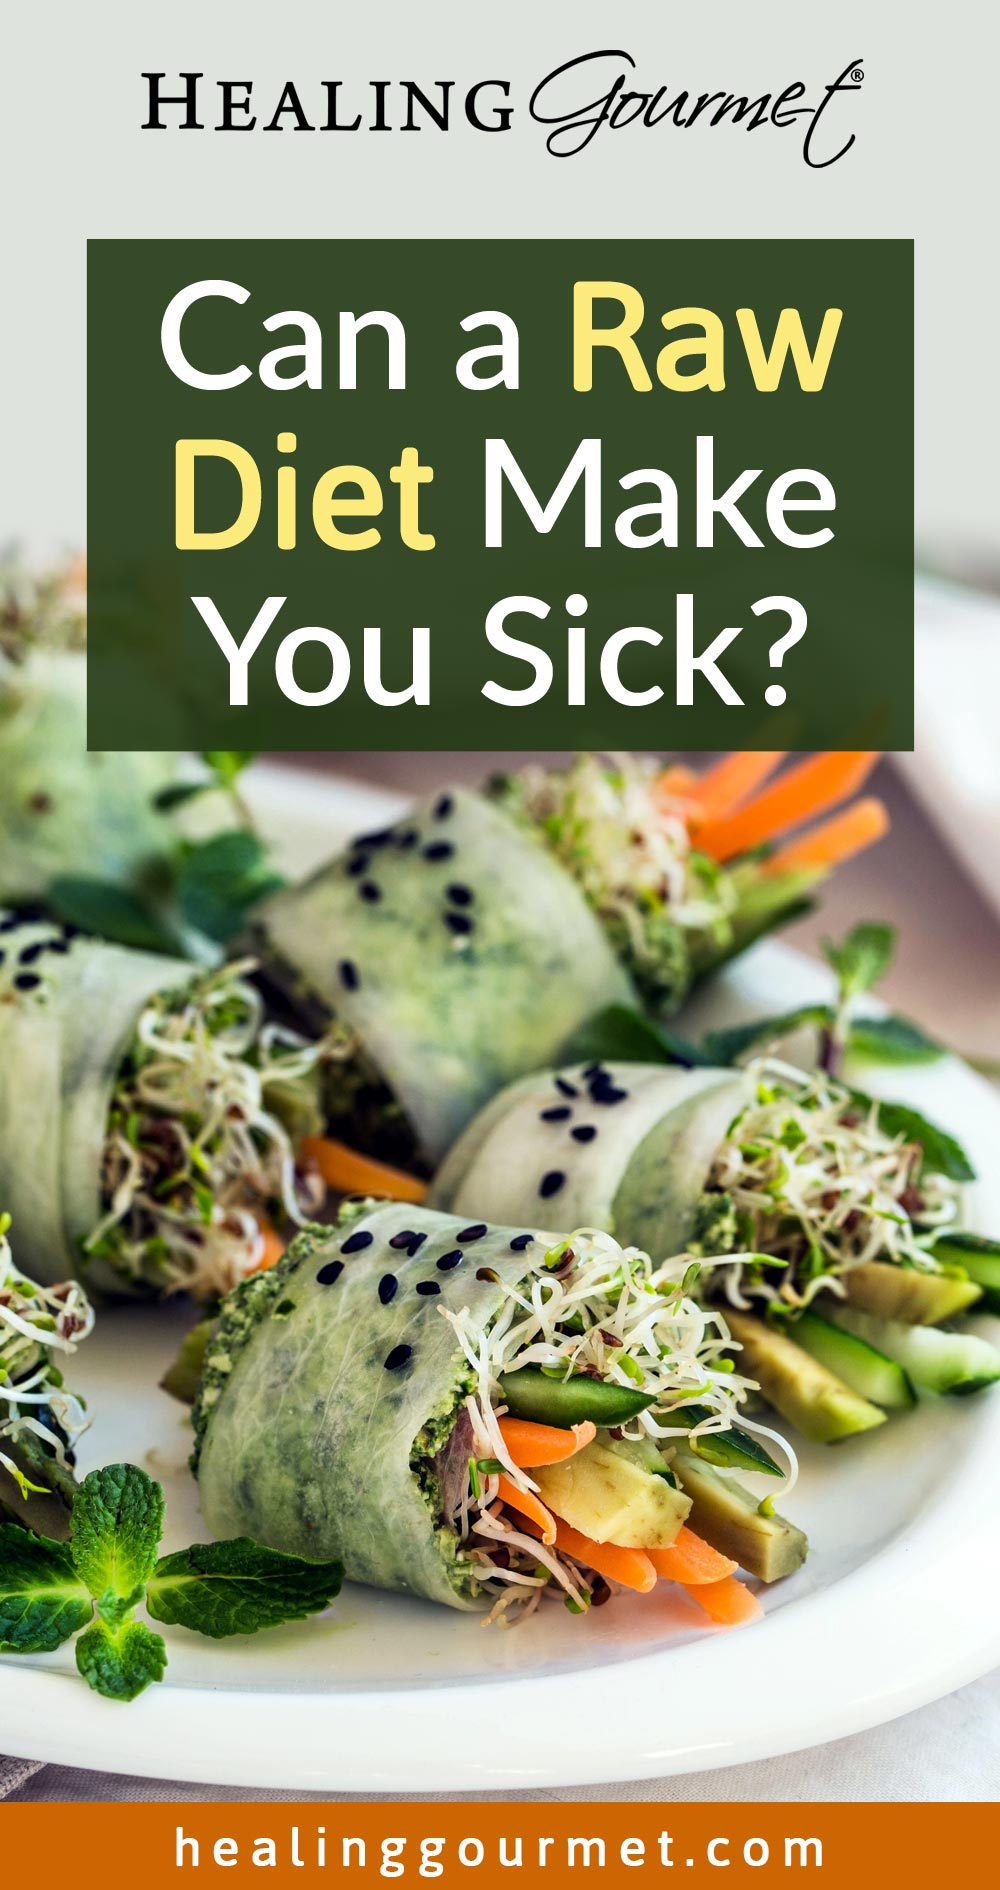 Can a Raw Diet Make You Sick?